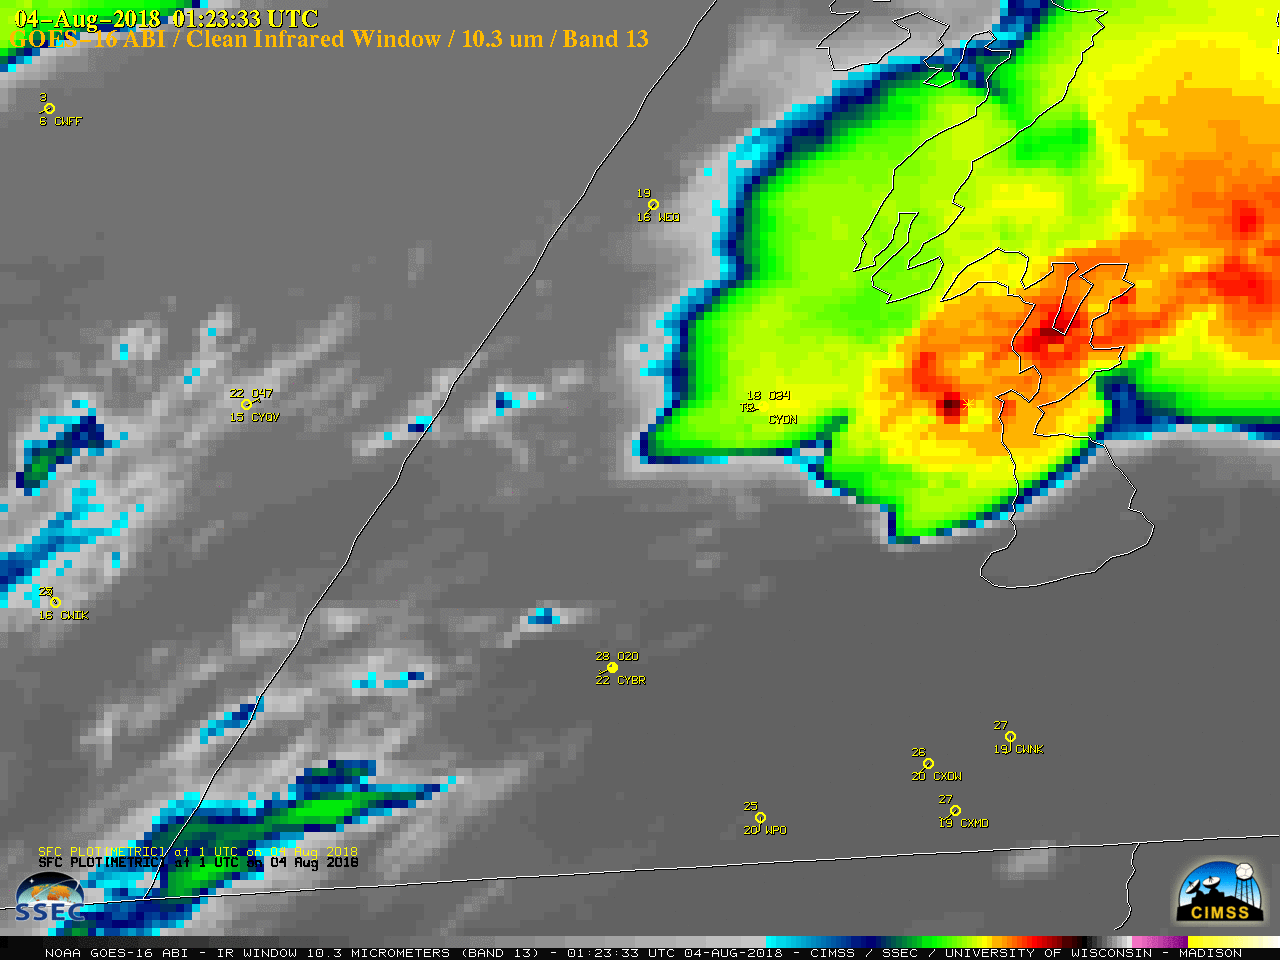 GOES-16 "Clean" Infrared Window (10.3 µm) images, with hourly plots of surface reports; black * denotes the town of Alonsa [click to play MP4 animation]